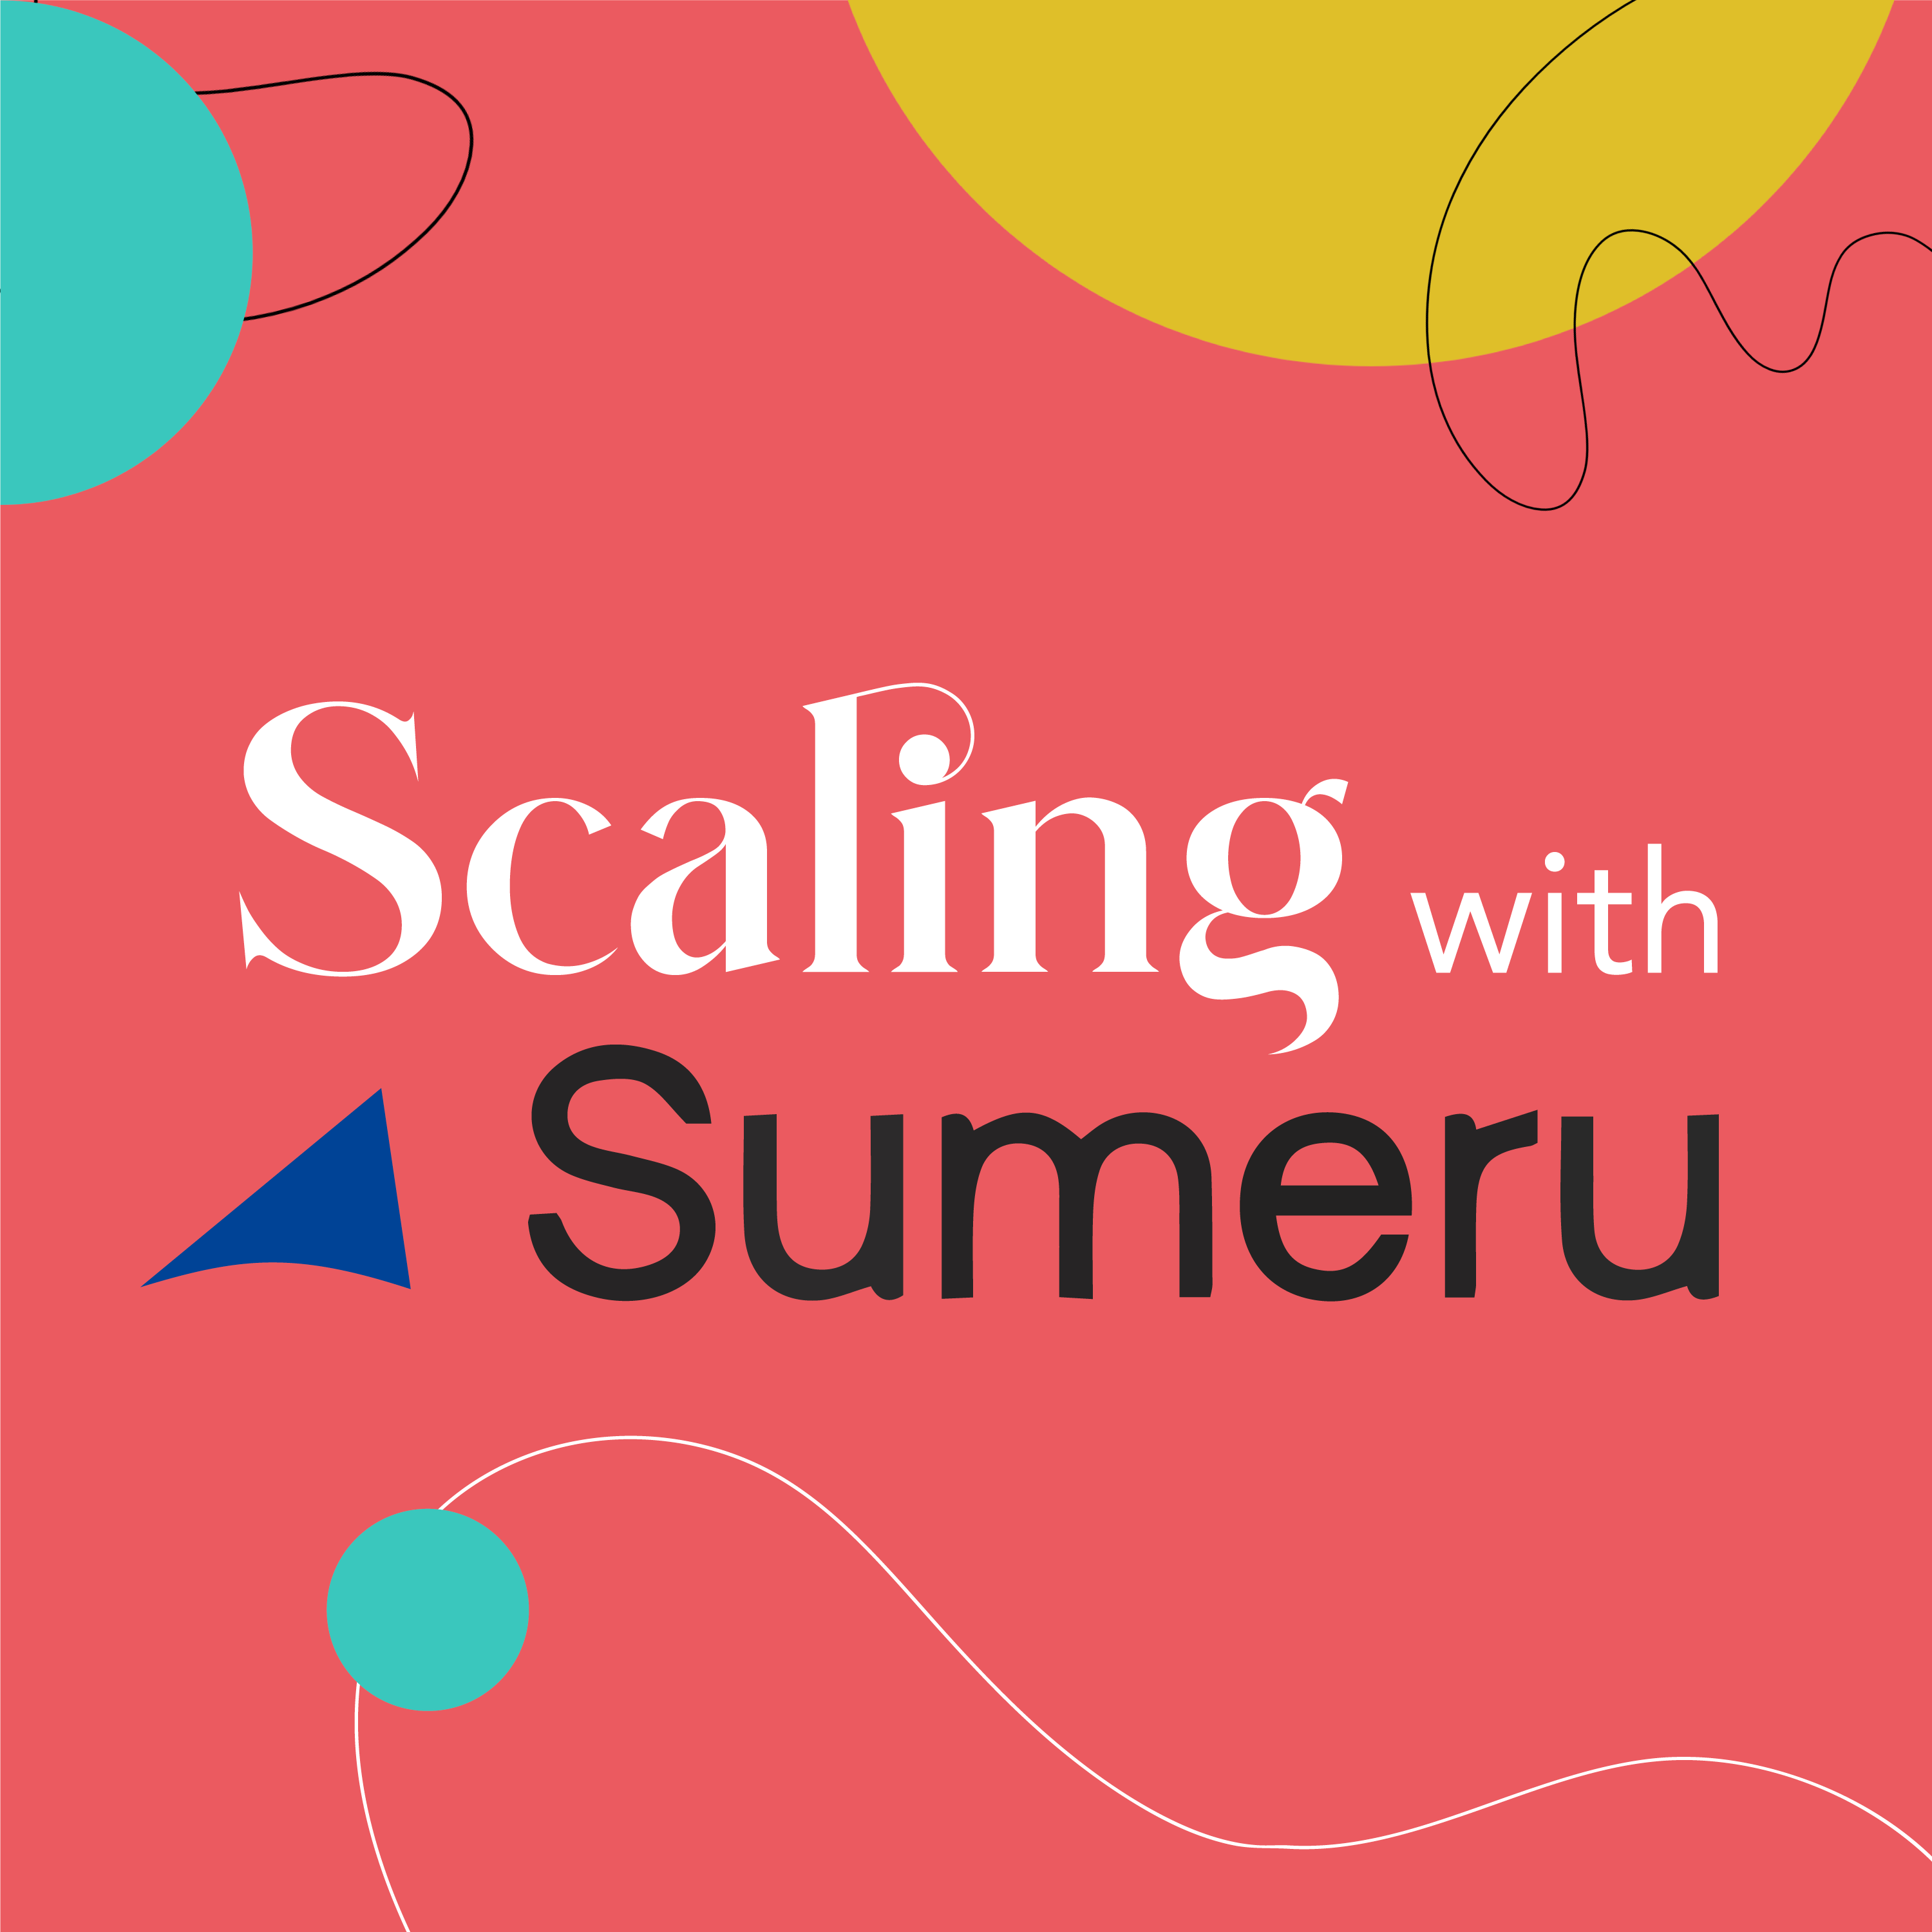 Scaling with Sumeru